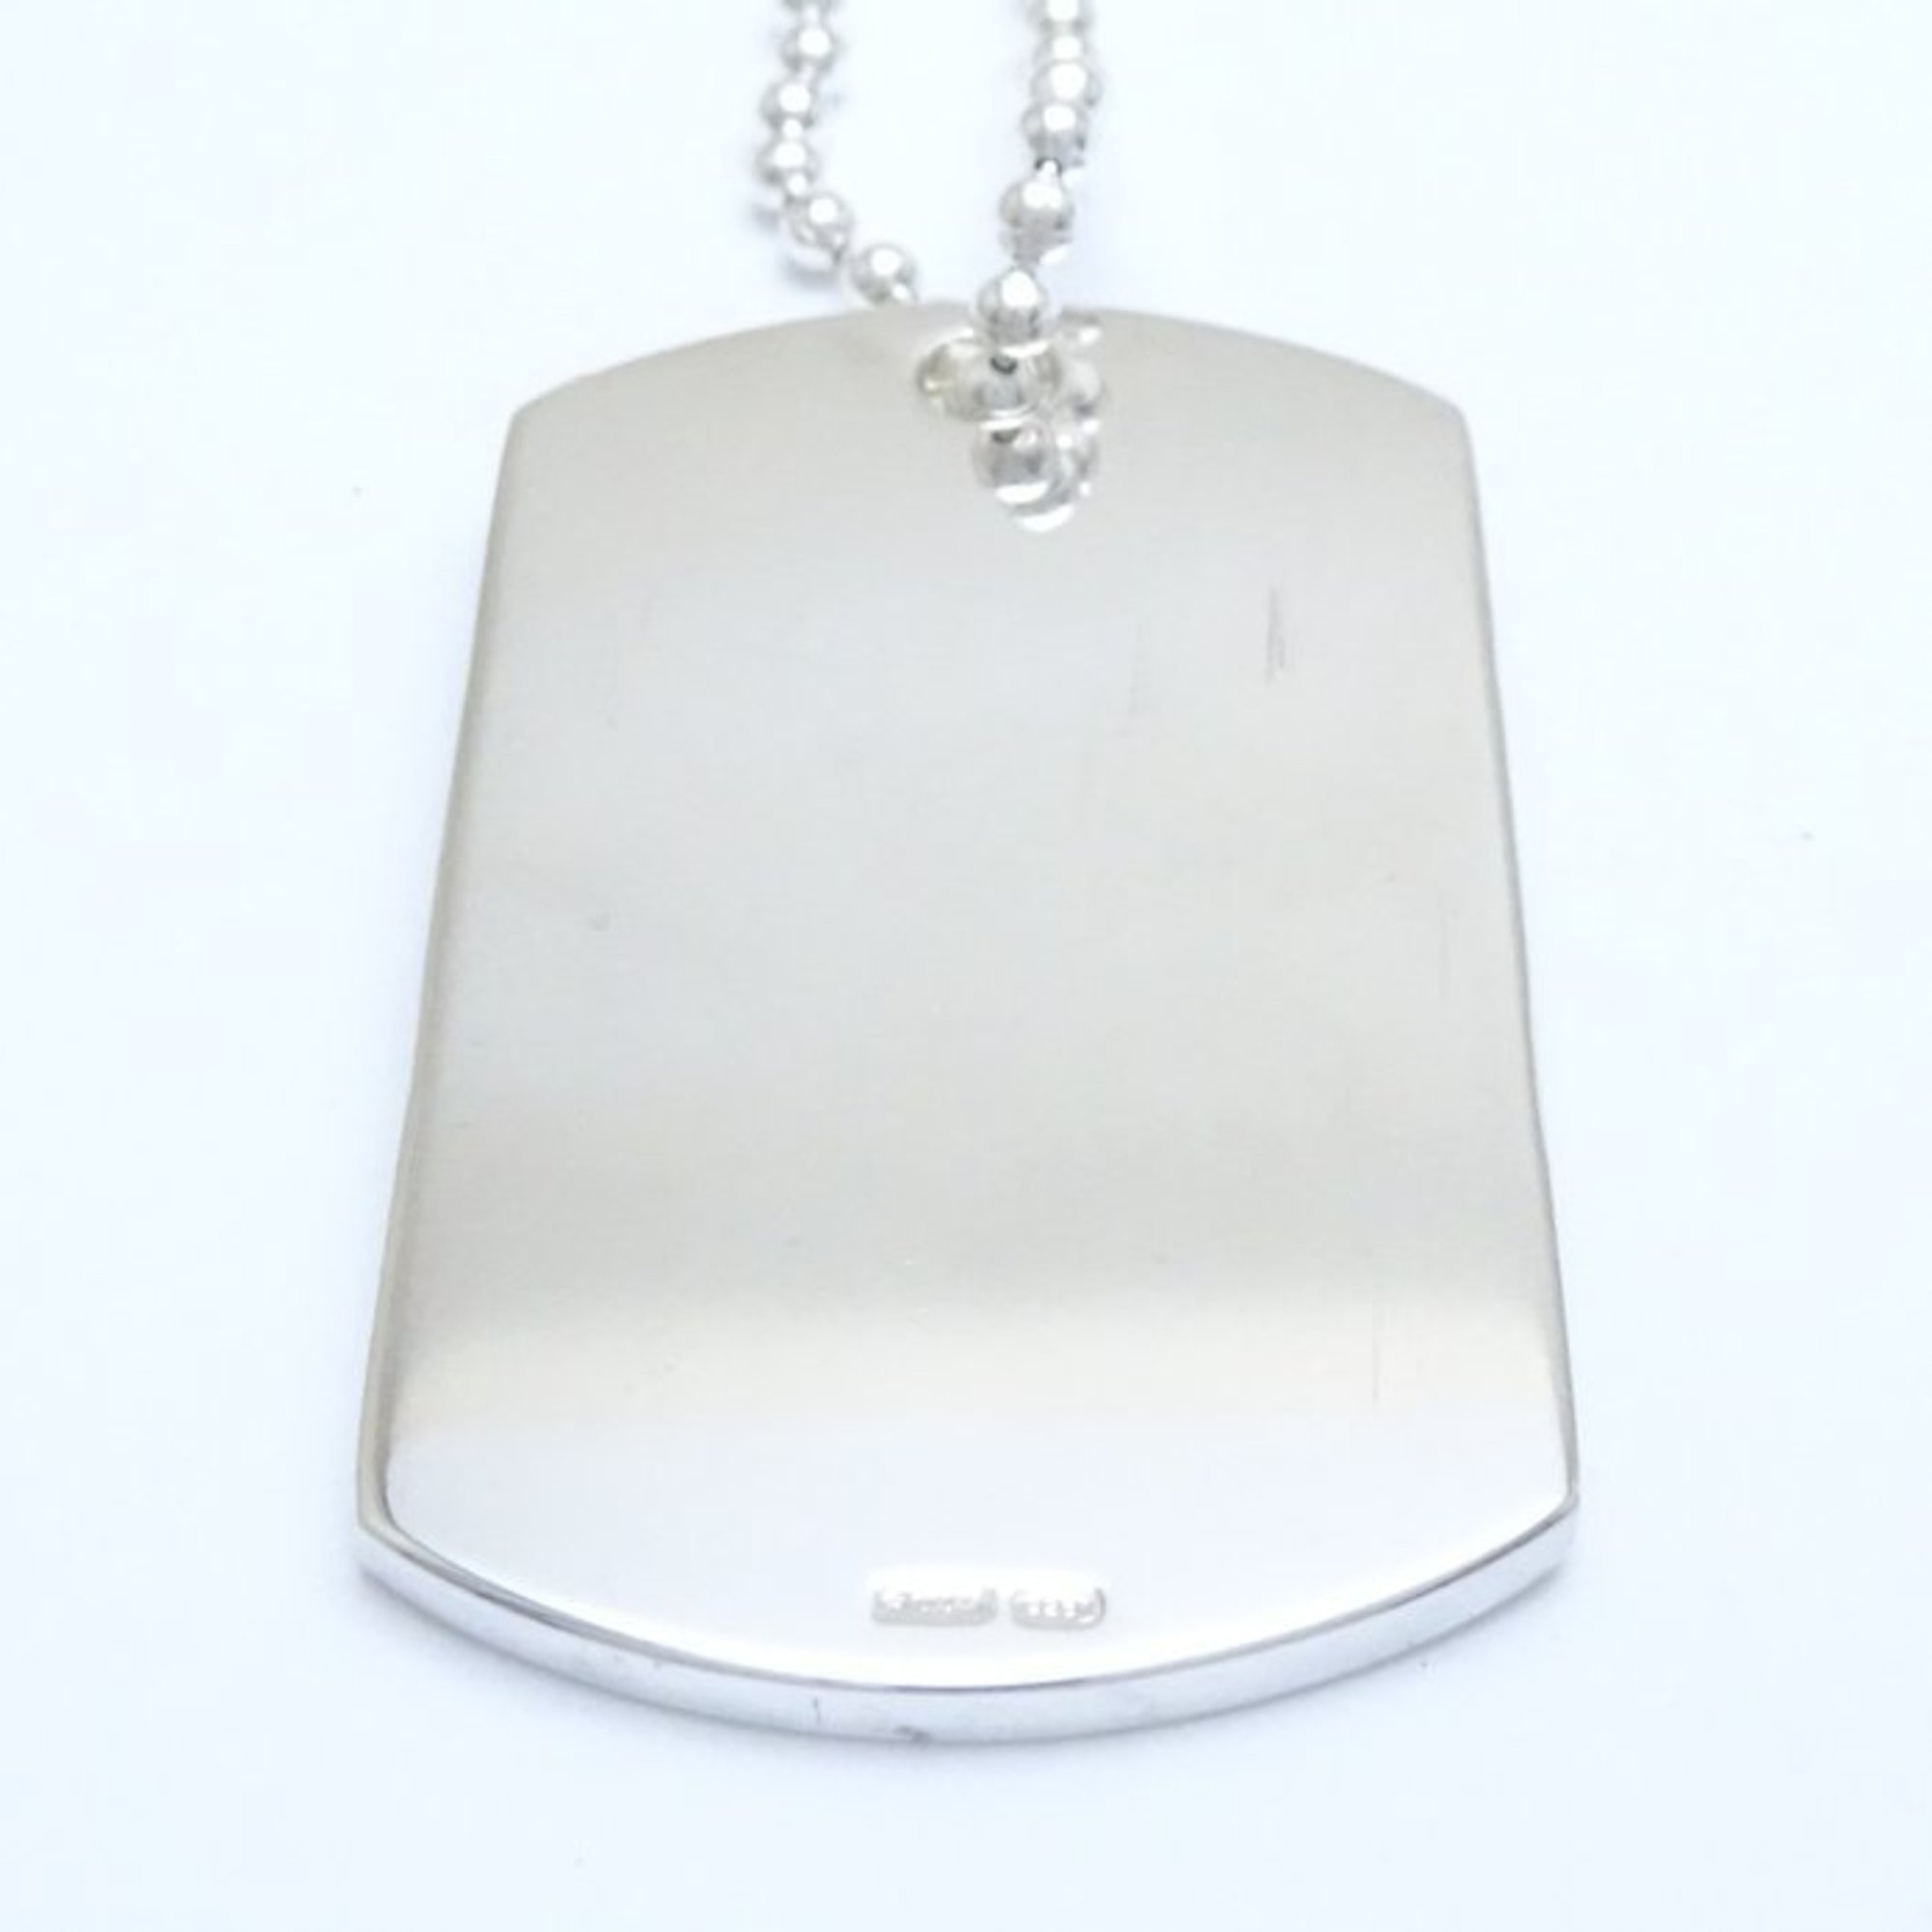 GUCCI dog tag plate pendant necklace silver 925 291266